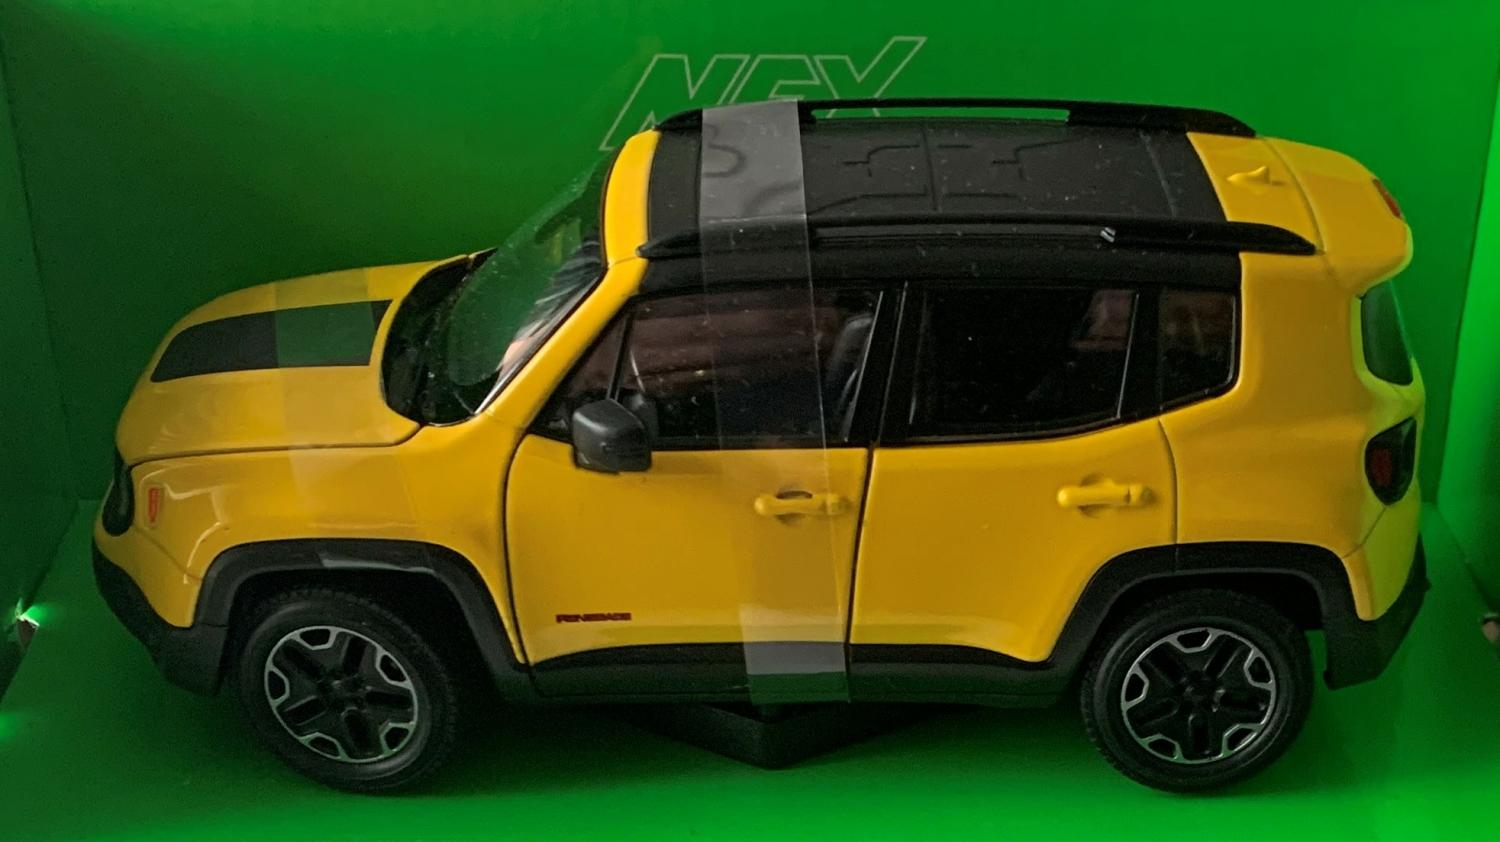 Jeep Renegade Trailhawk in yellow 1:24 scale model from Welly